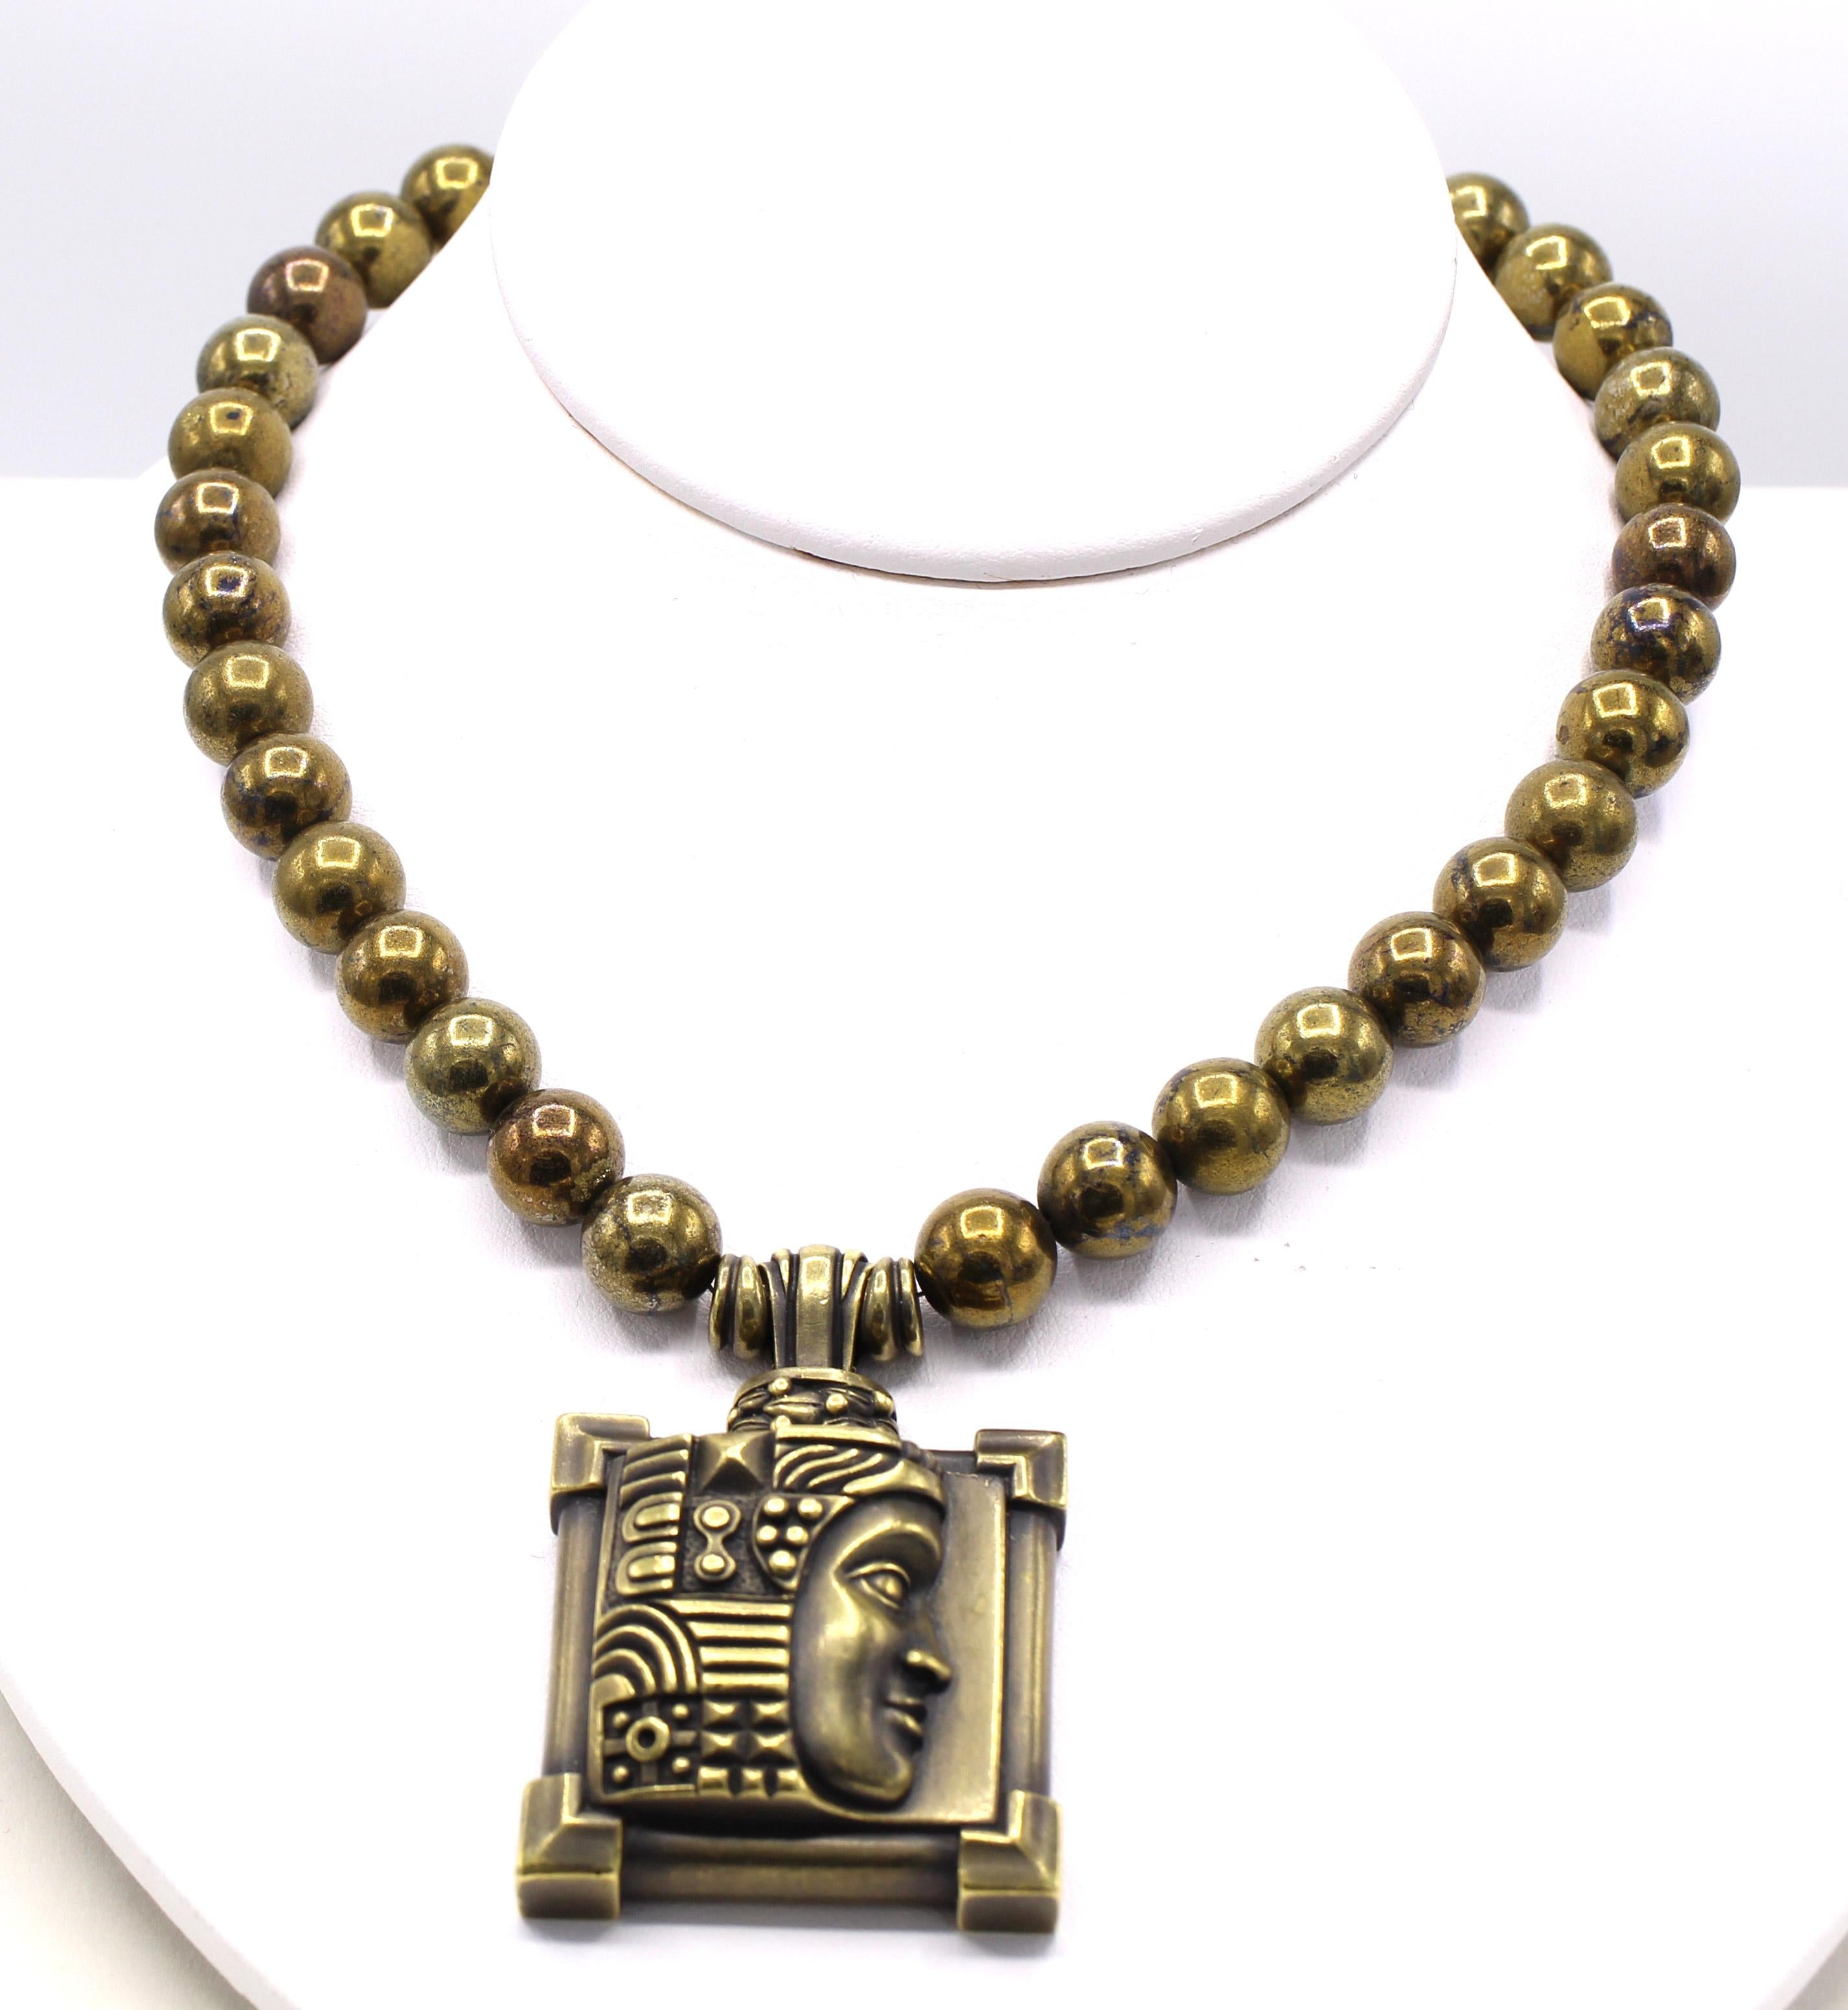 Iconic American designer and jeweler Barry Kieselstein-Cord was well known for his extravagant designs, motifs and unique coloration of gold. In this unique pendant necklace the center pieces is a square element with steps and frames at each corner,